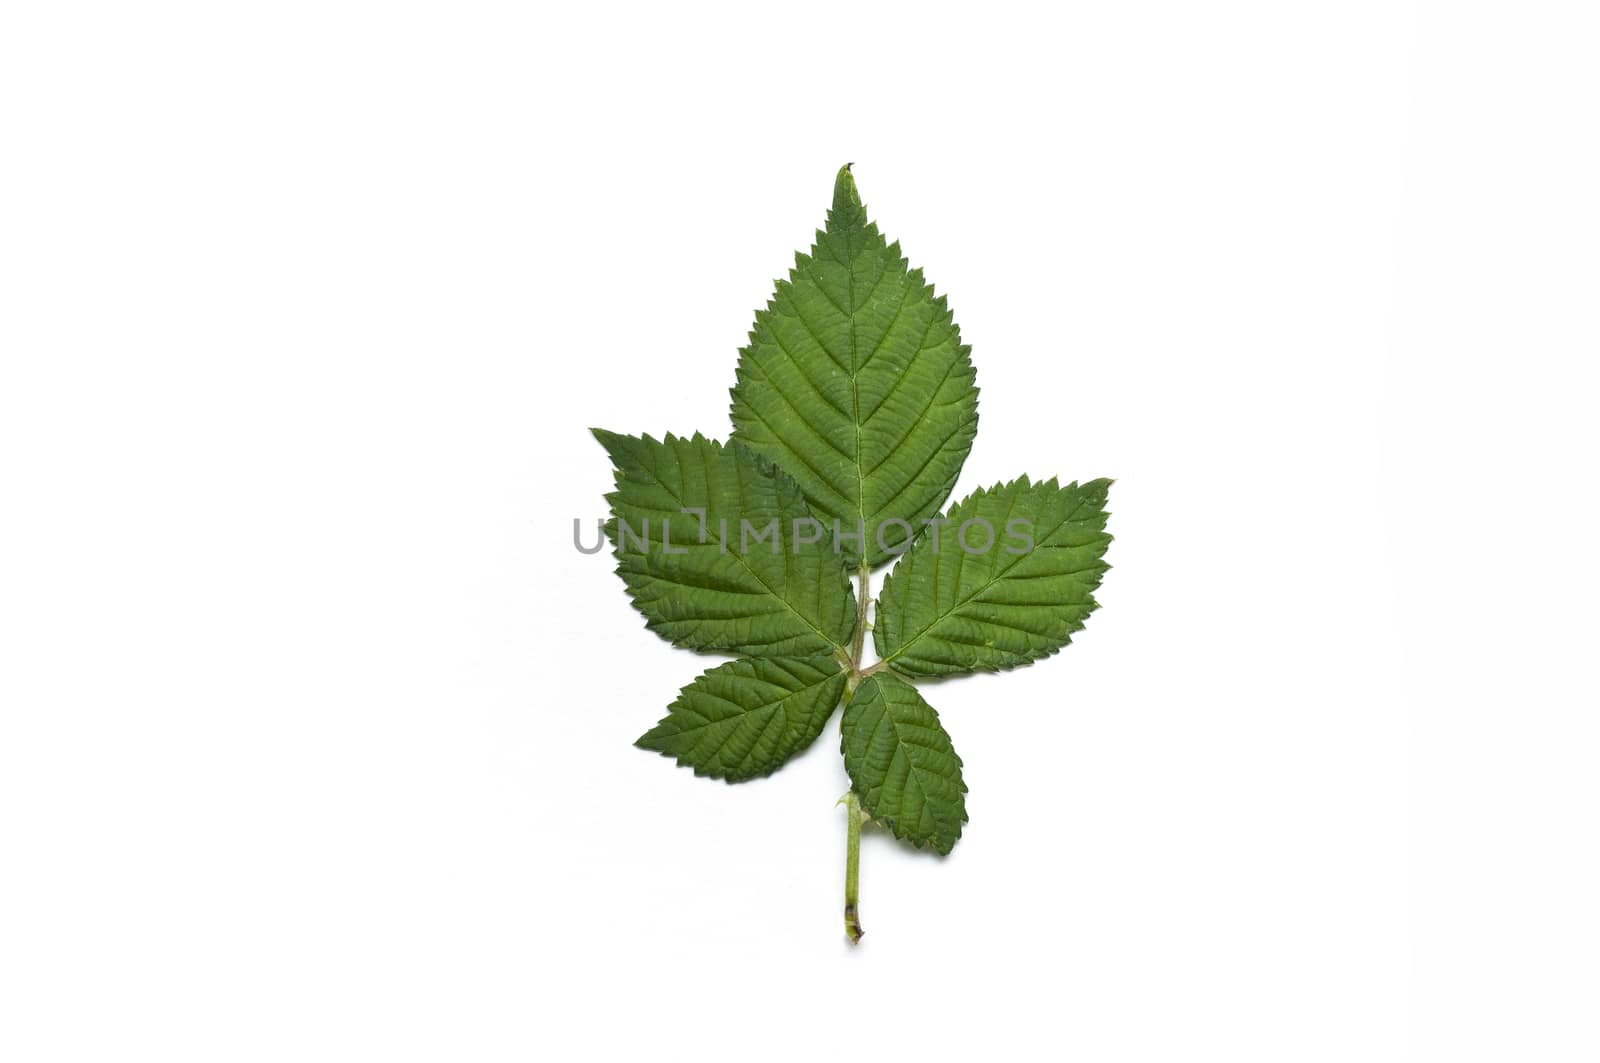 Isolated leaf of blackberry by NeydtStock